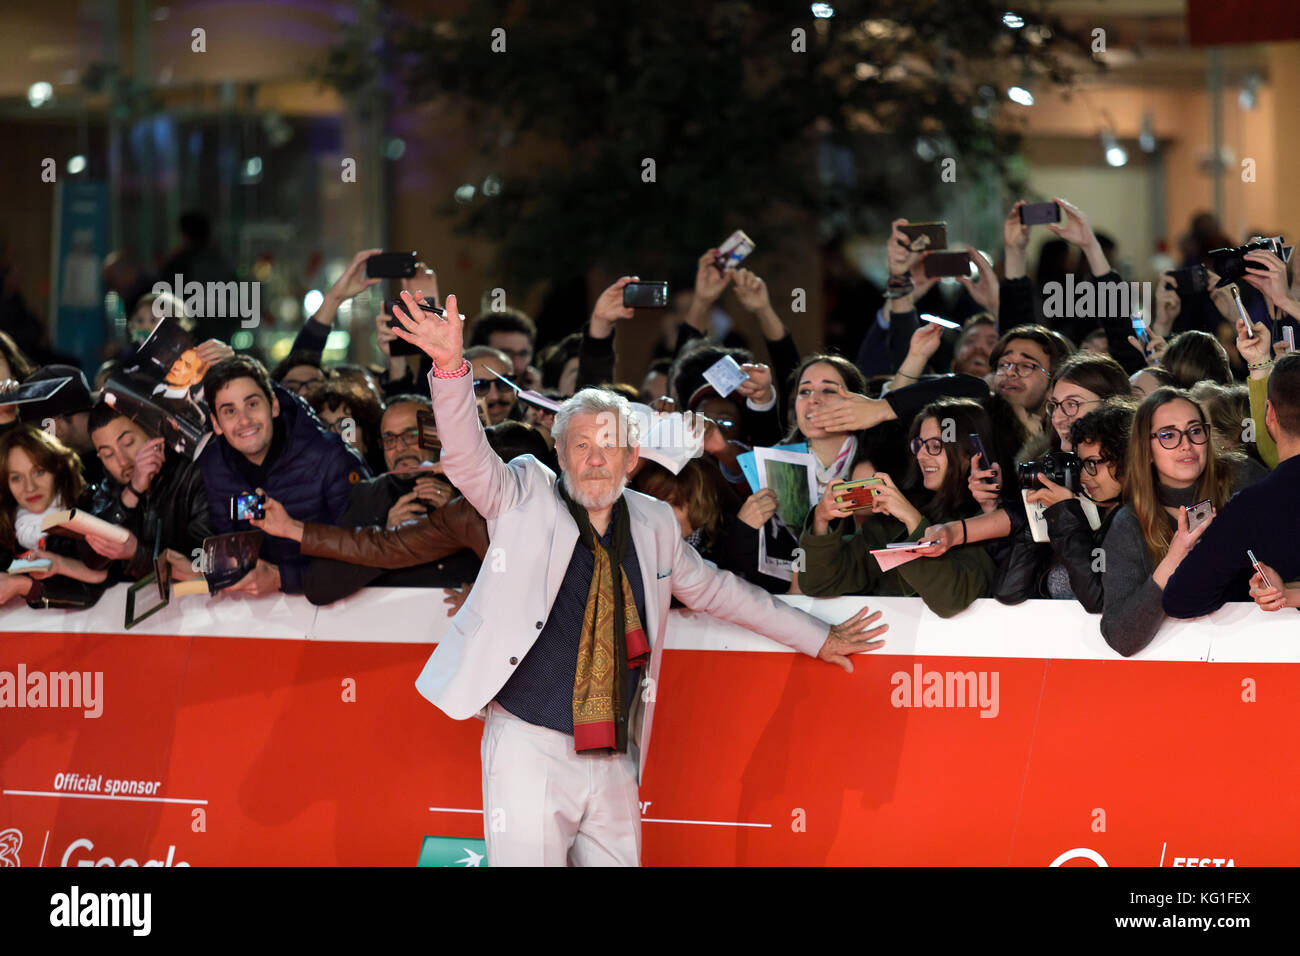 Ian McKellen walks a red carpet for 'Ian McKellen: Playing The Part' during the 12th Rome Film Fest at Auditorium Parco Della Musica on November 1, 2017 in Rome, Italy. Credit: Polifoto/Alamy Live News Stock Photo